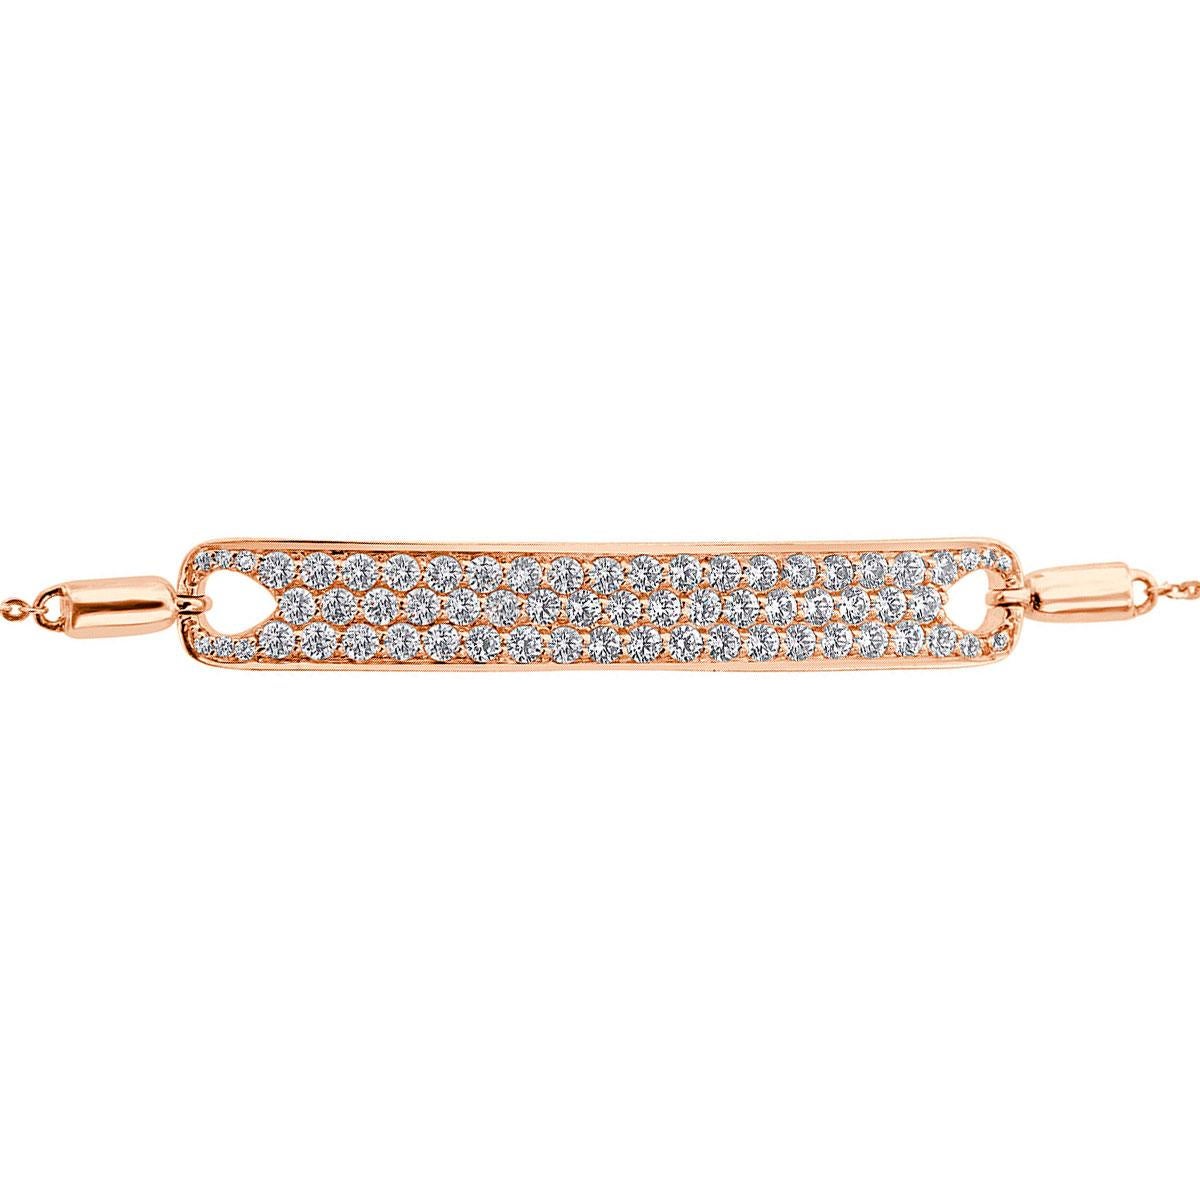 This stunning adjustable bolo-style bracelet features round brilliant diamonds micro-prong-set. Experience the difference!

Product details: 

Center Gemstone Type: NATURAL DIAMOND
Center Gemstone Color: WHITE
Center Gemstone Shape: ROUND
Center